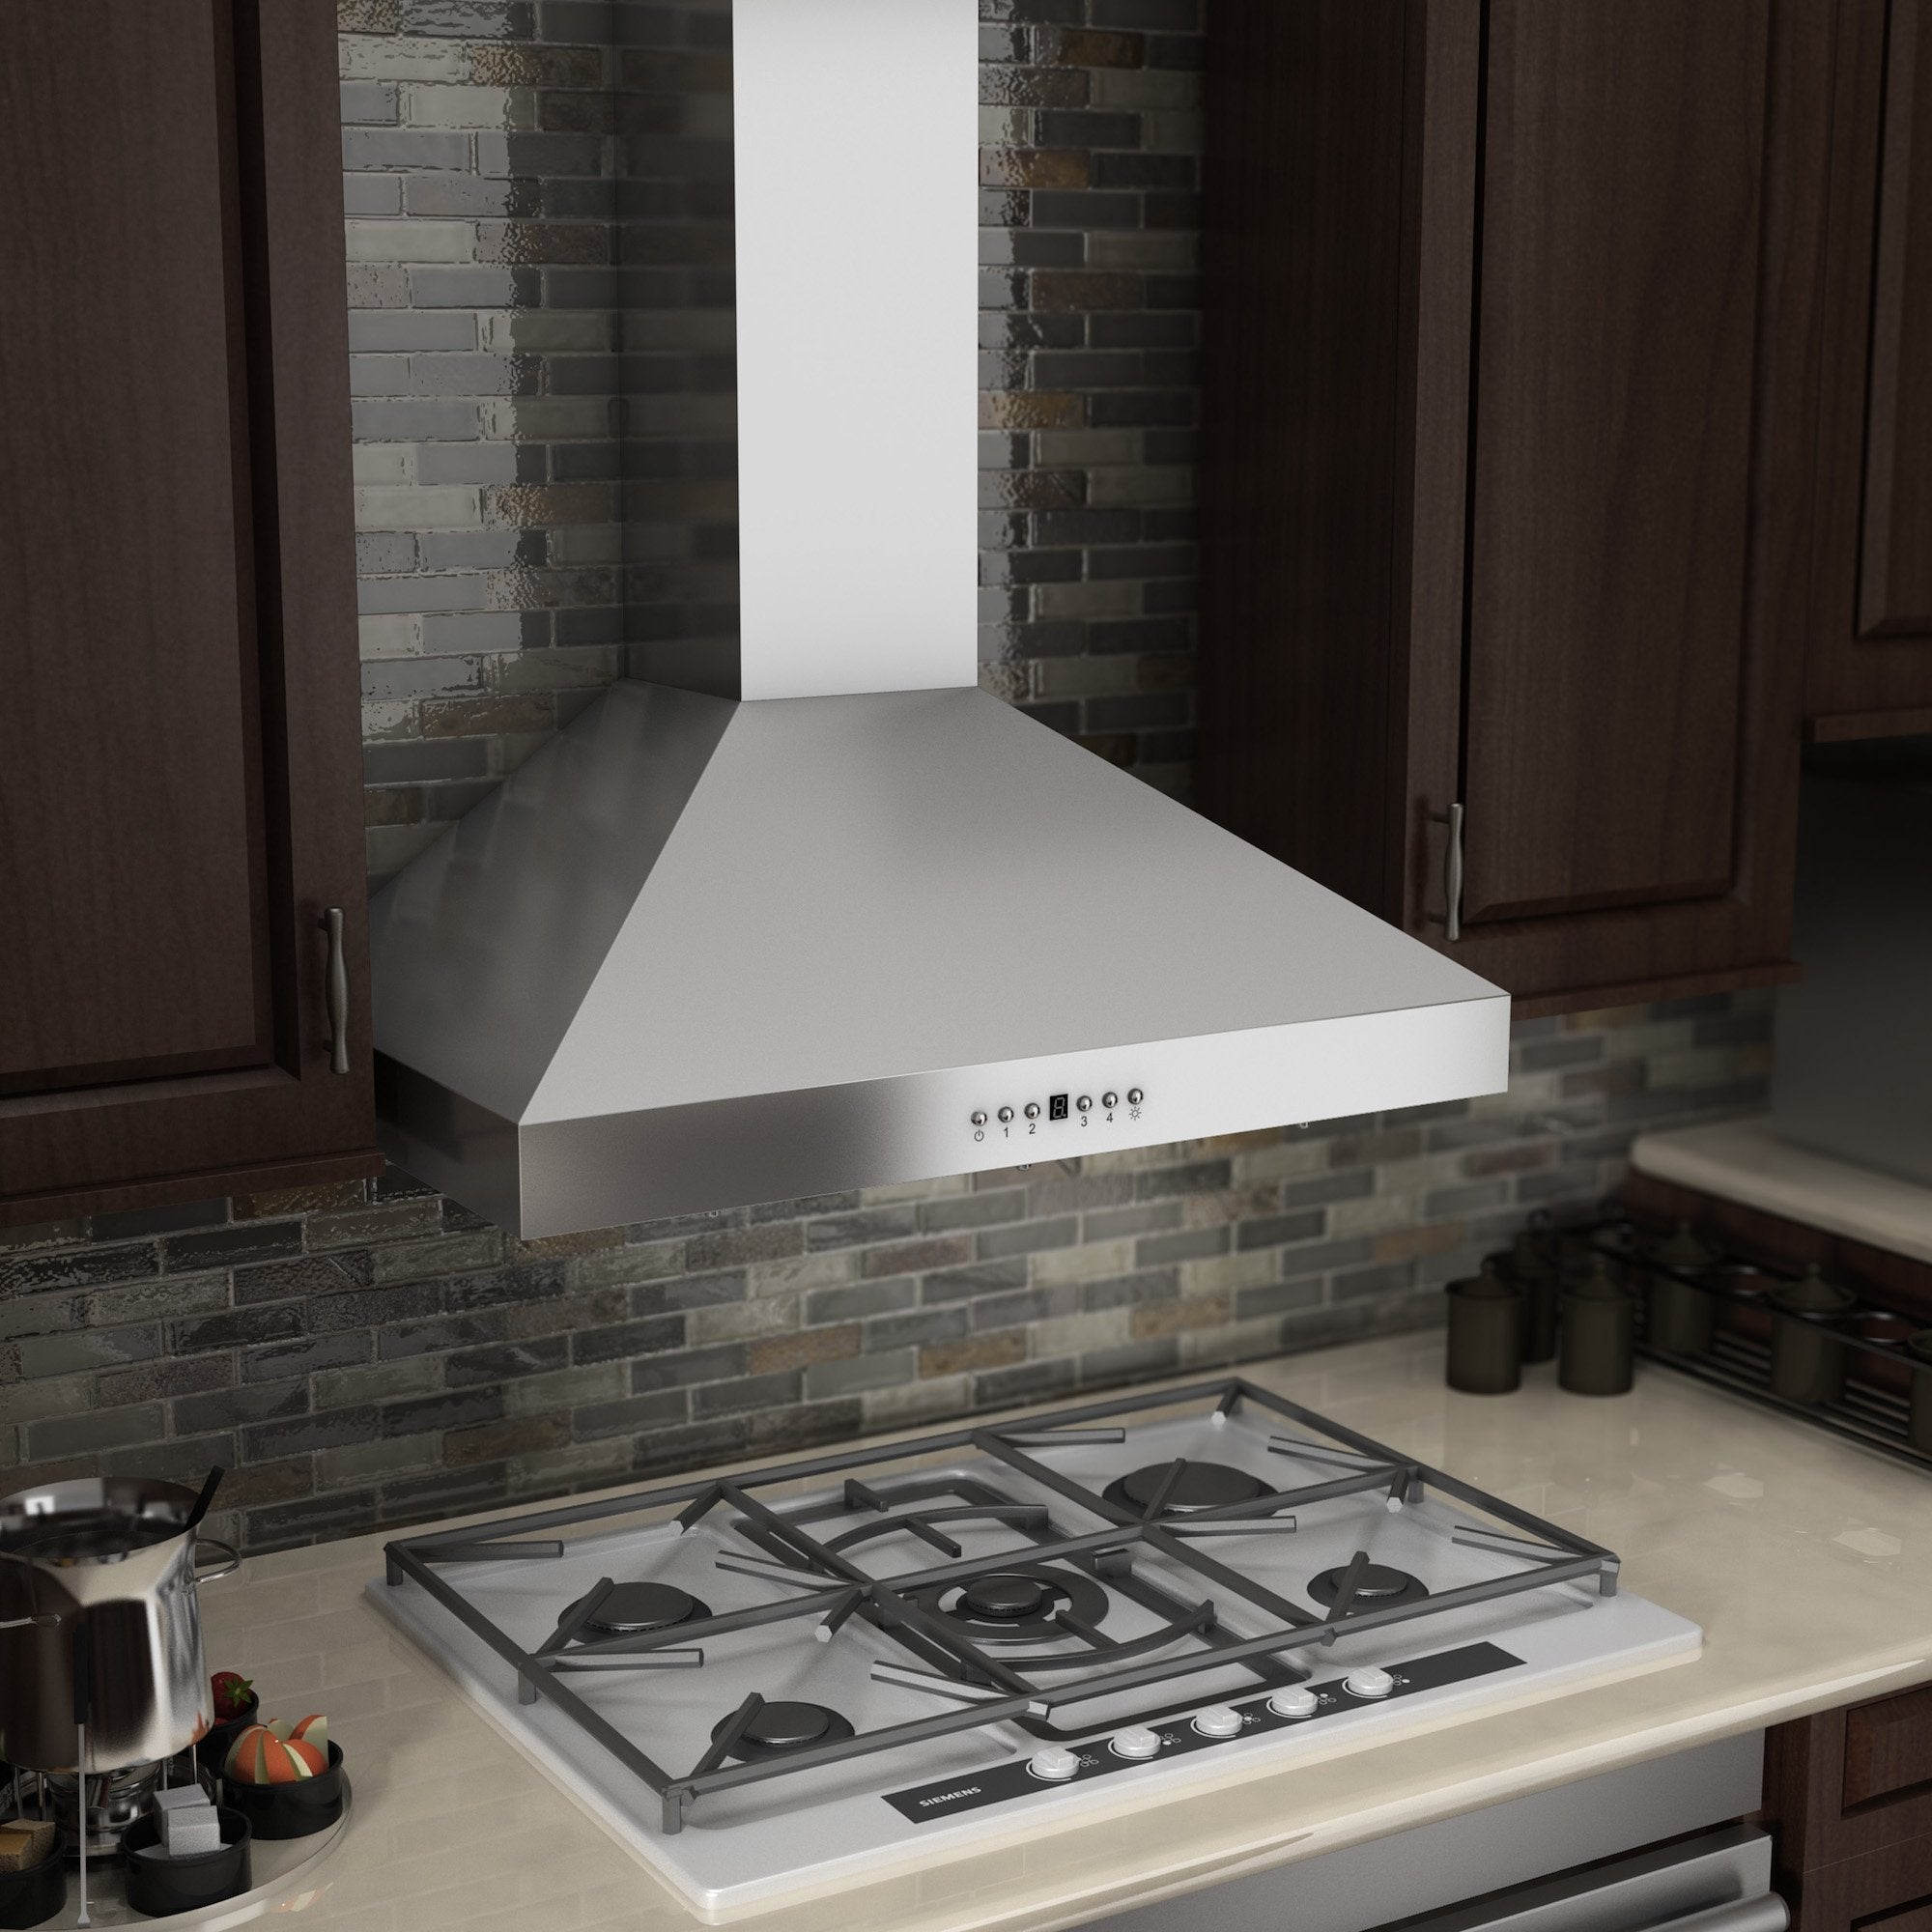 ZLINE Convertible Vent Wall Mount Range Hood in Stainless Steel (KL3) rendering in a rustic kitchen above gas cooktop.